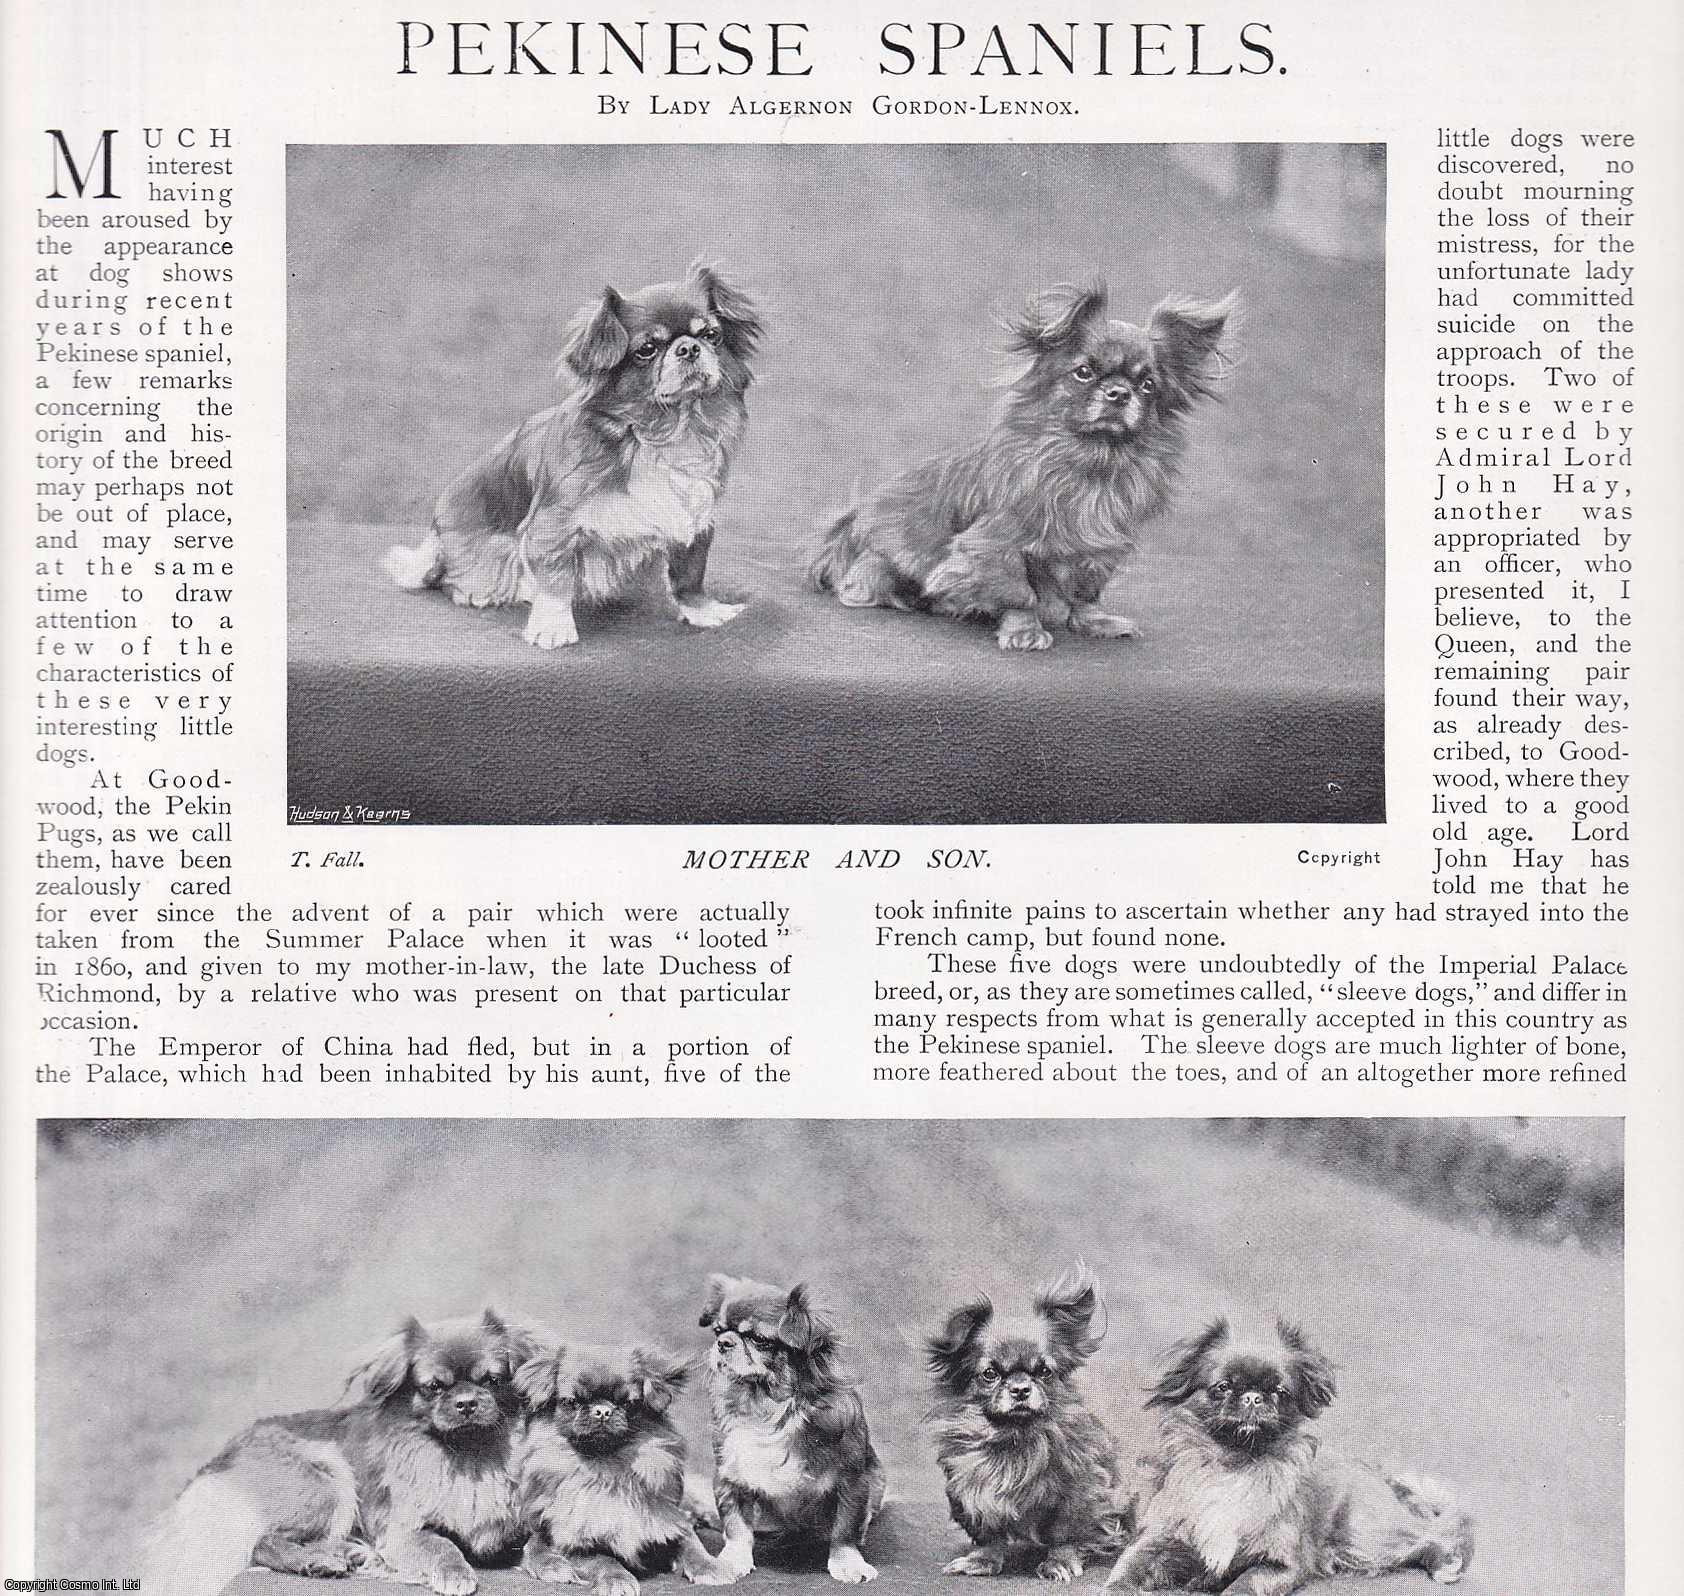 Lady Algernon Gordon-Lennox - Pekinese Spaniels. Several pictures and accompanying text, removed from an original issue of Country Life Magazine, 1899.